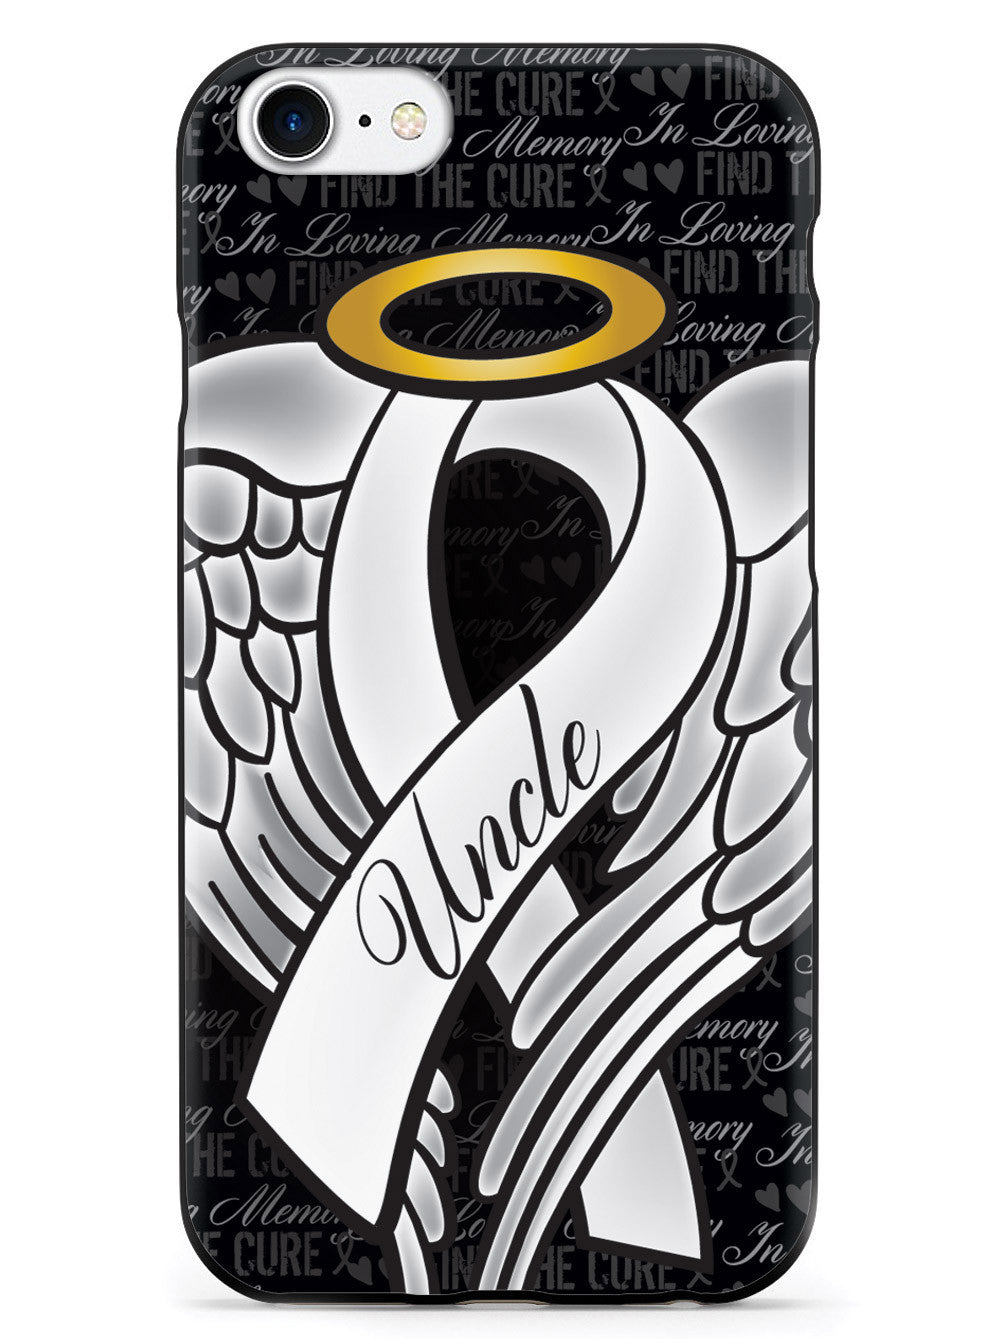 In Loving Memory of My Uncle - White Ribbon Case